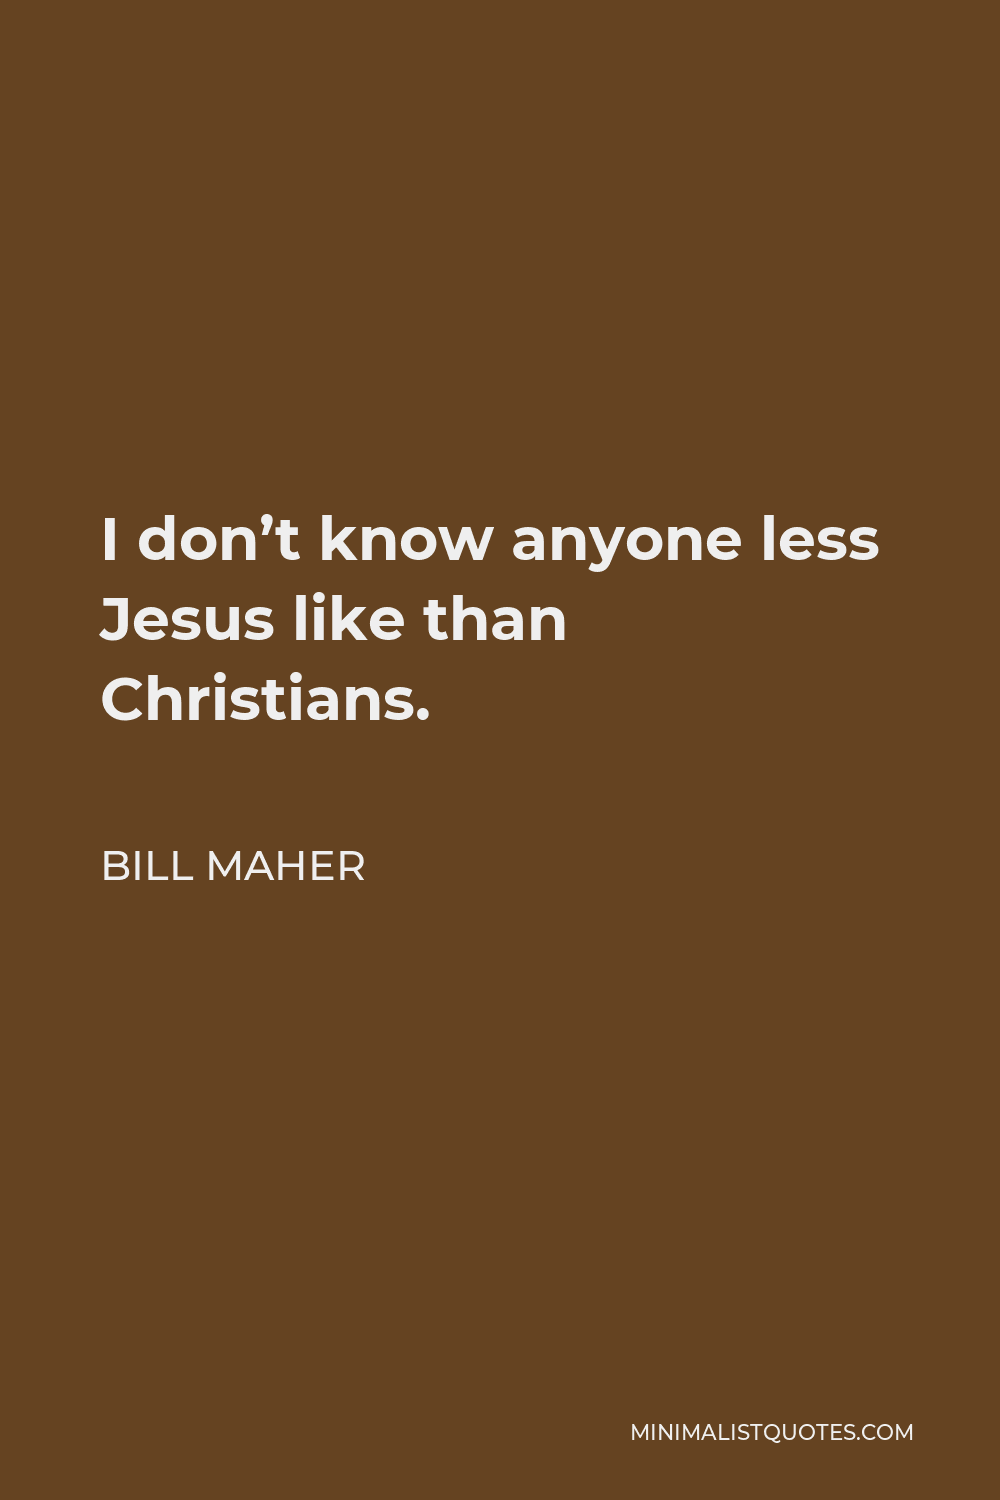 Bill Maher Quote - I don’t know anyone less Jesus like than Christians.